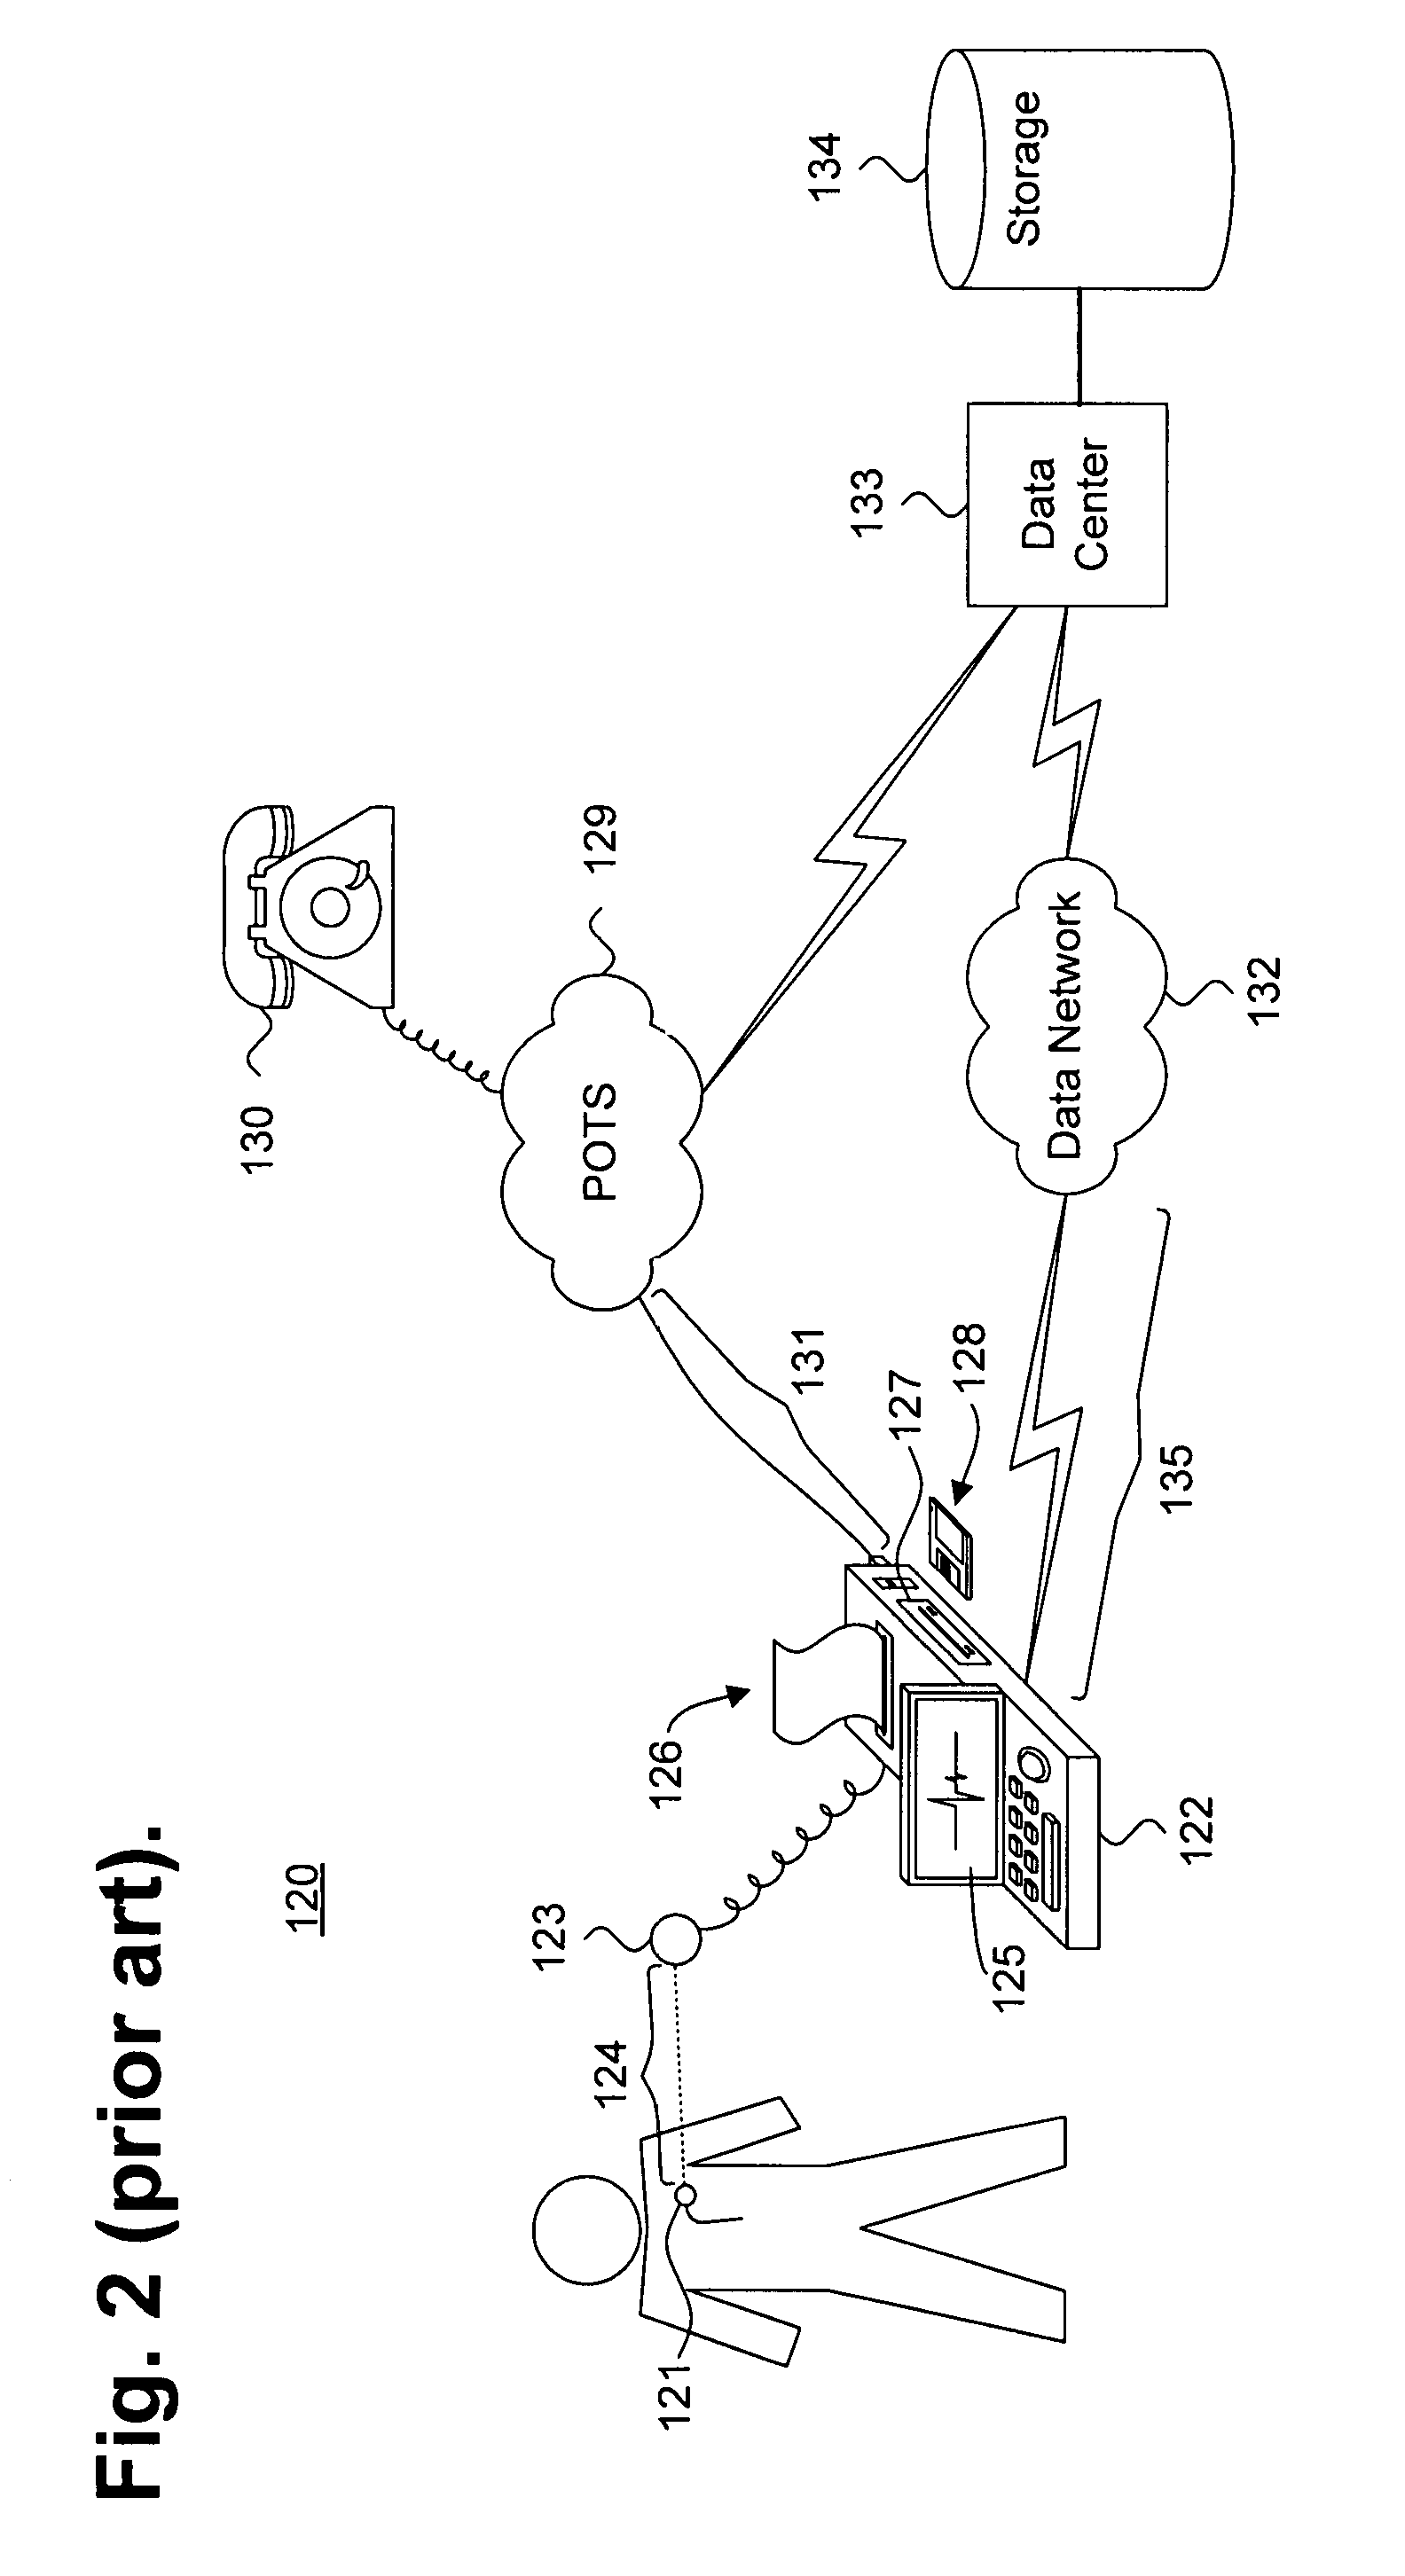 System and method for providing communications between a physically secure programmer and an external device using a cellular network